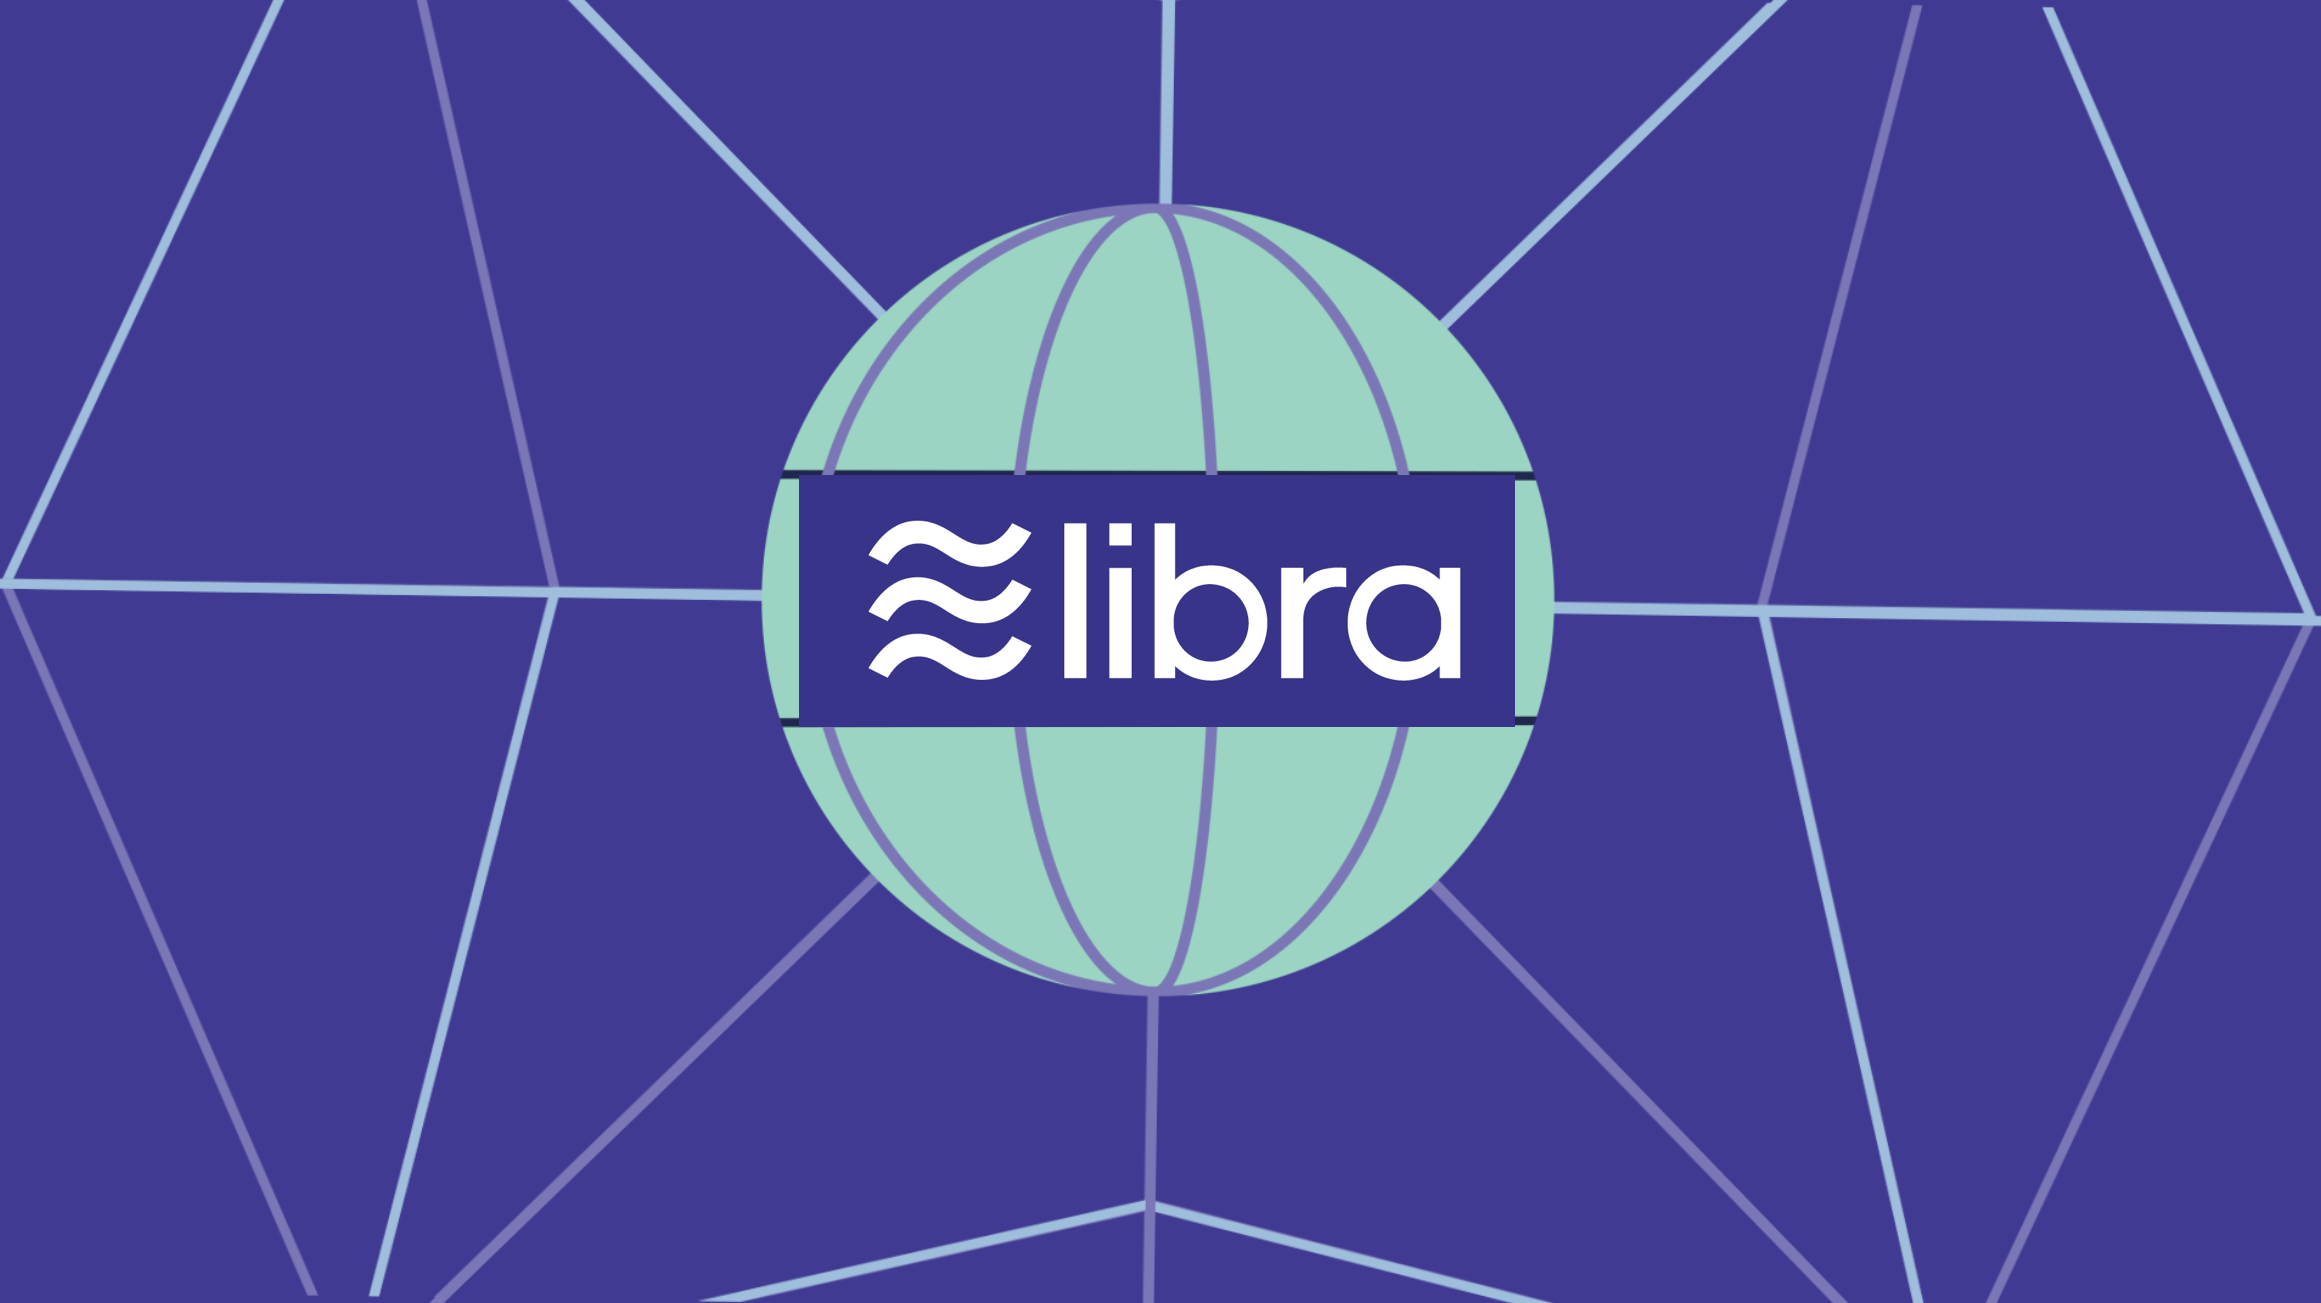 Facebook’s cryptocurrency Libra, explained - The Verge